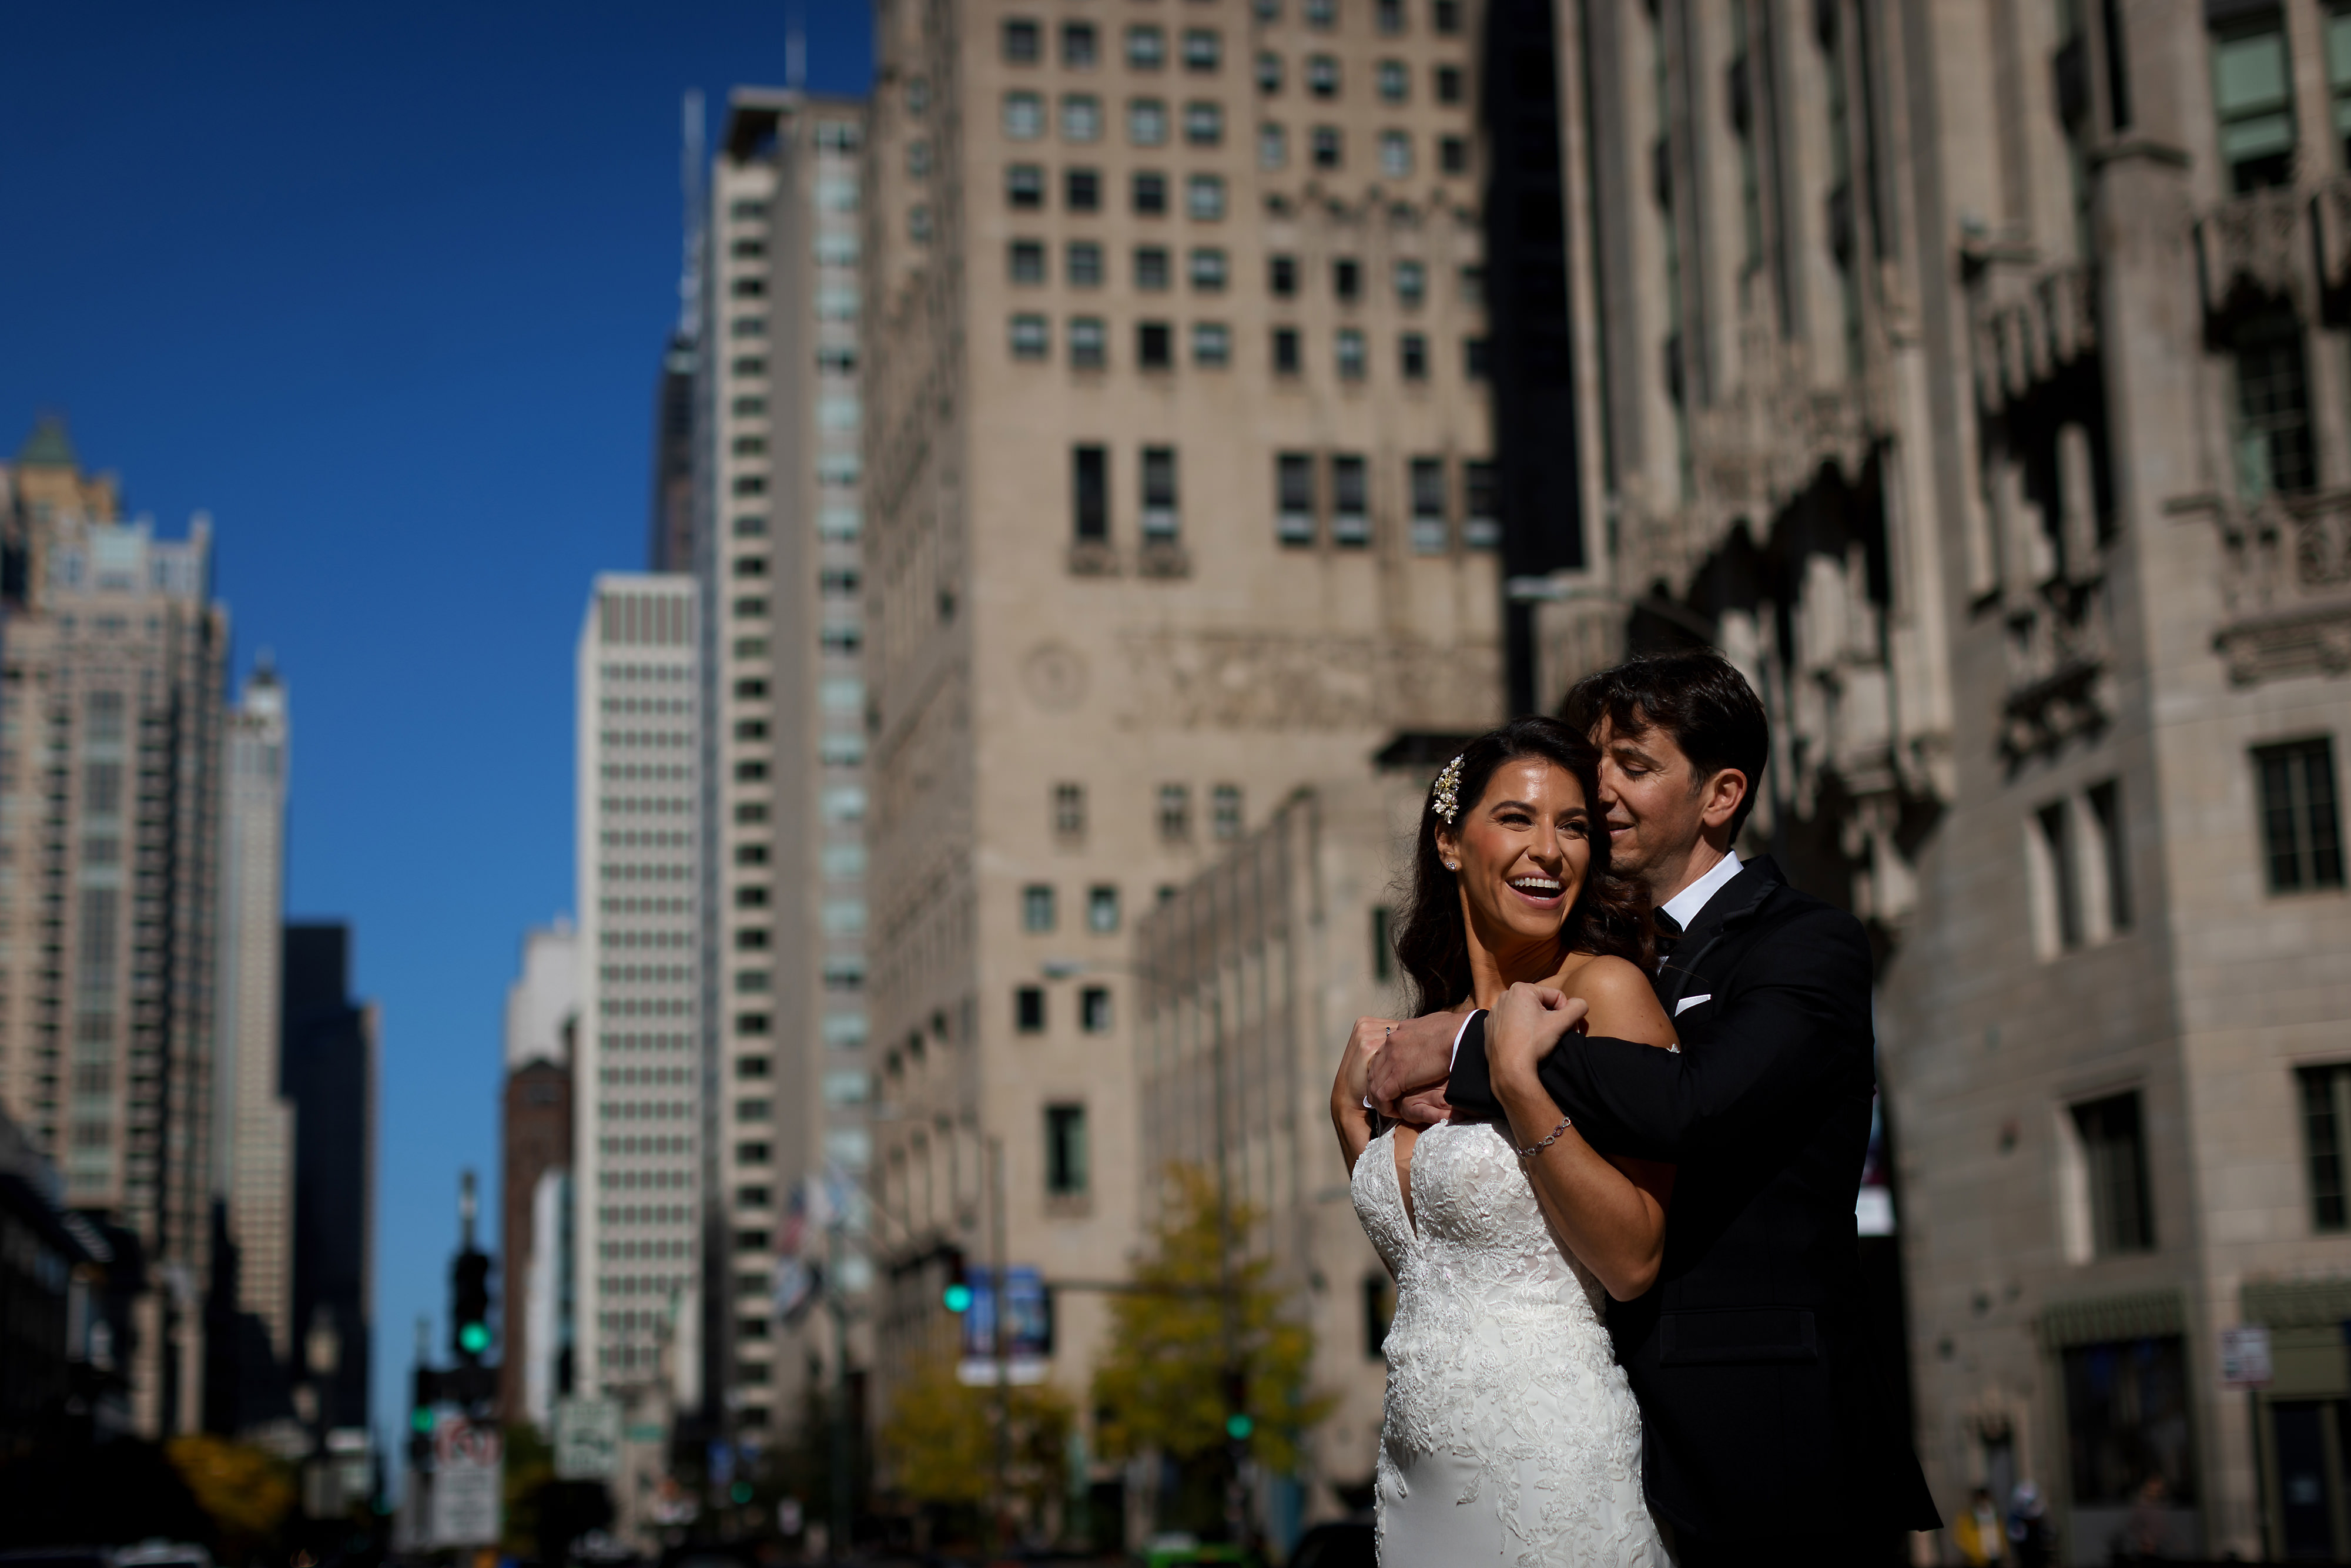 Bride and groom kiss outside the Wrigley Building with the Chicago River in the background